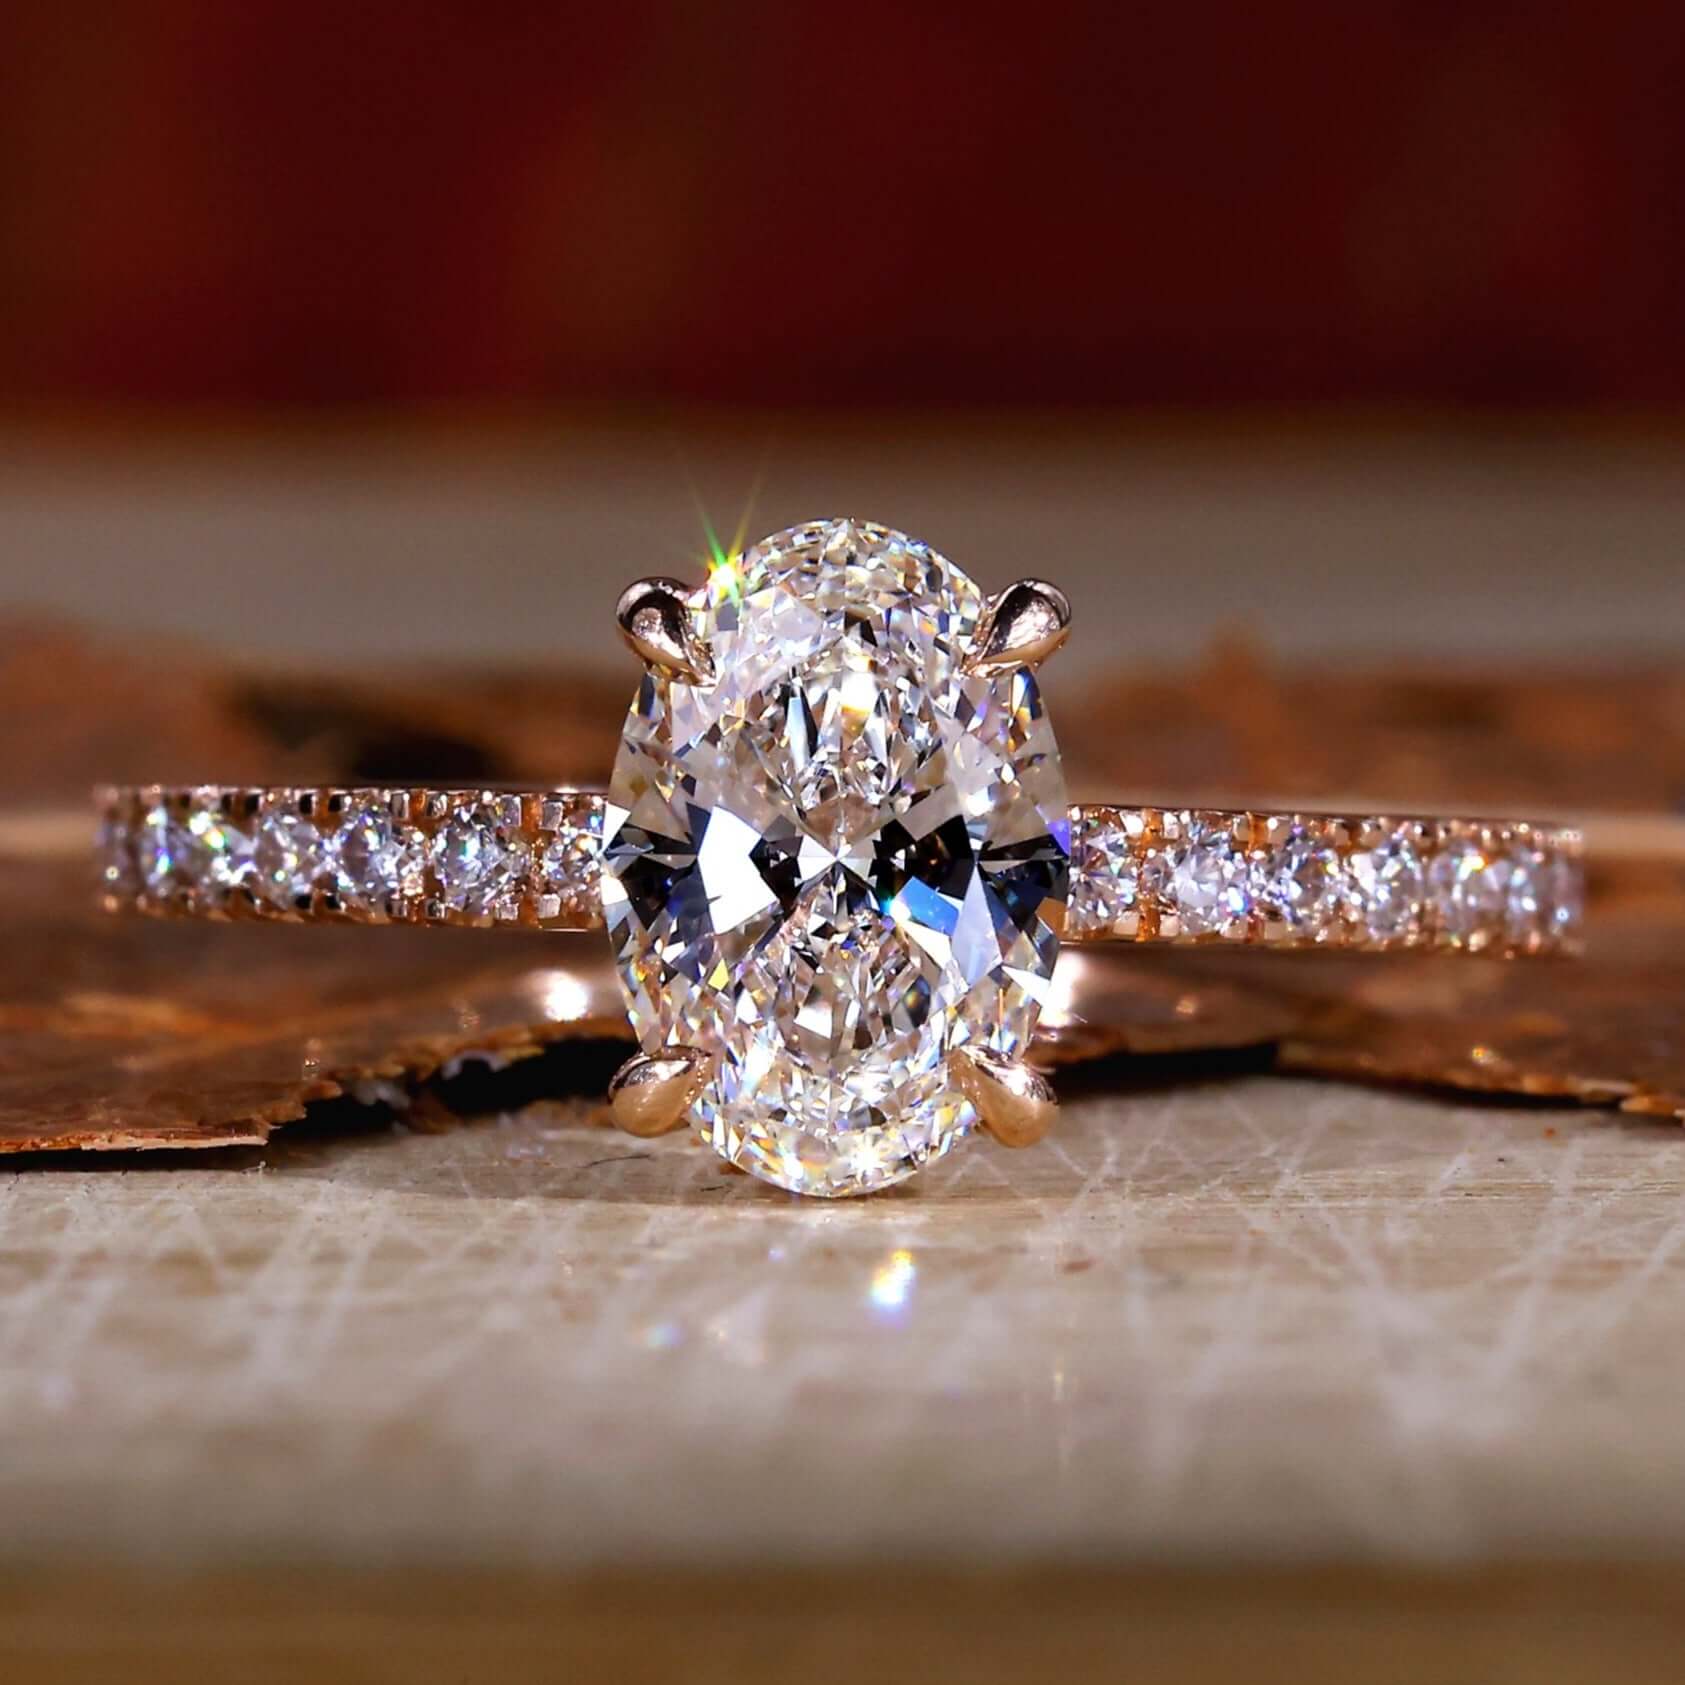 1 carat oval engagement rings